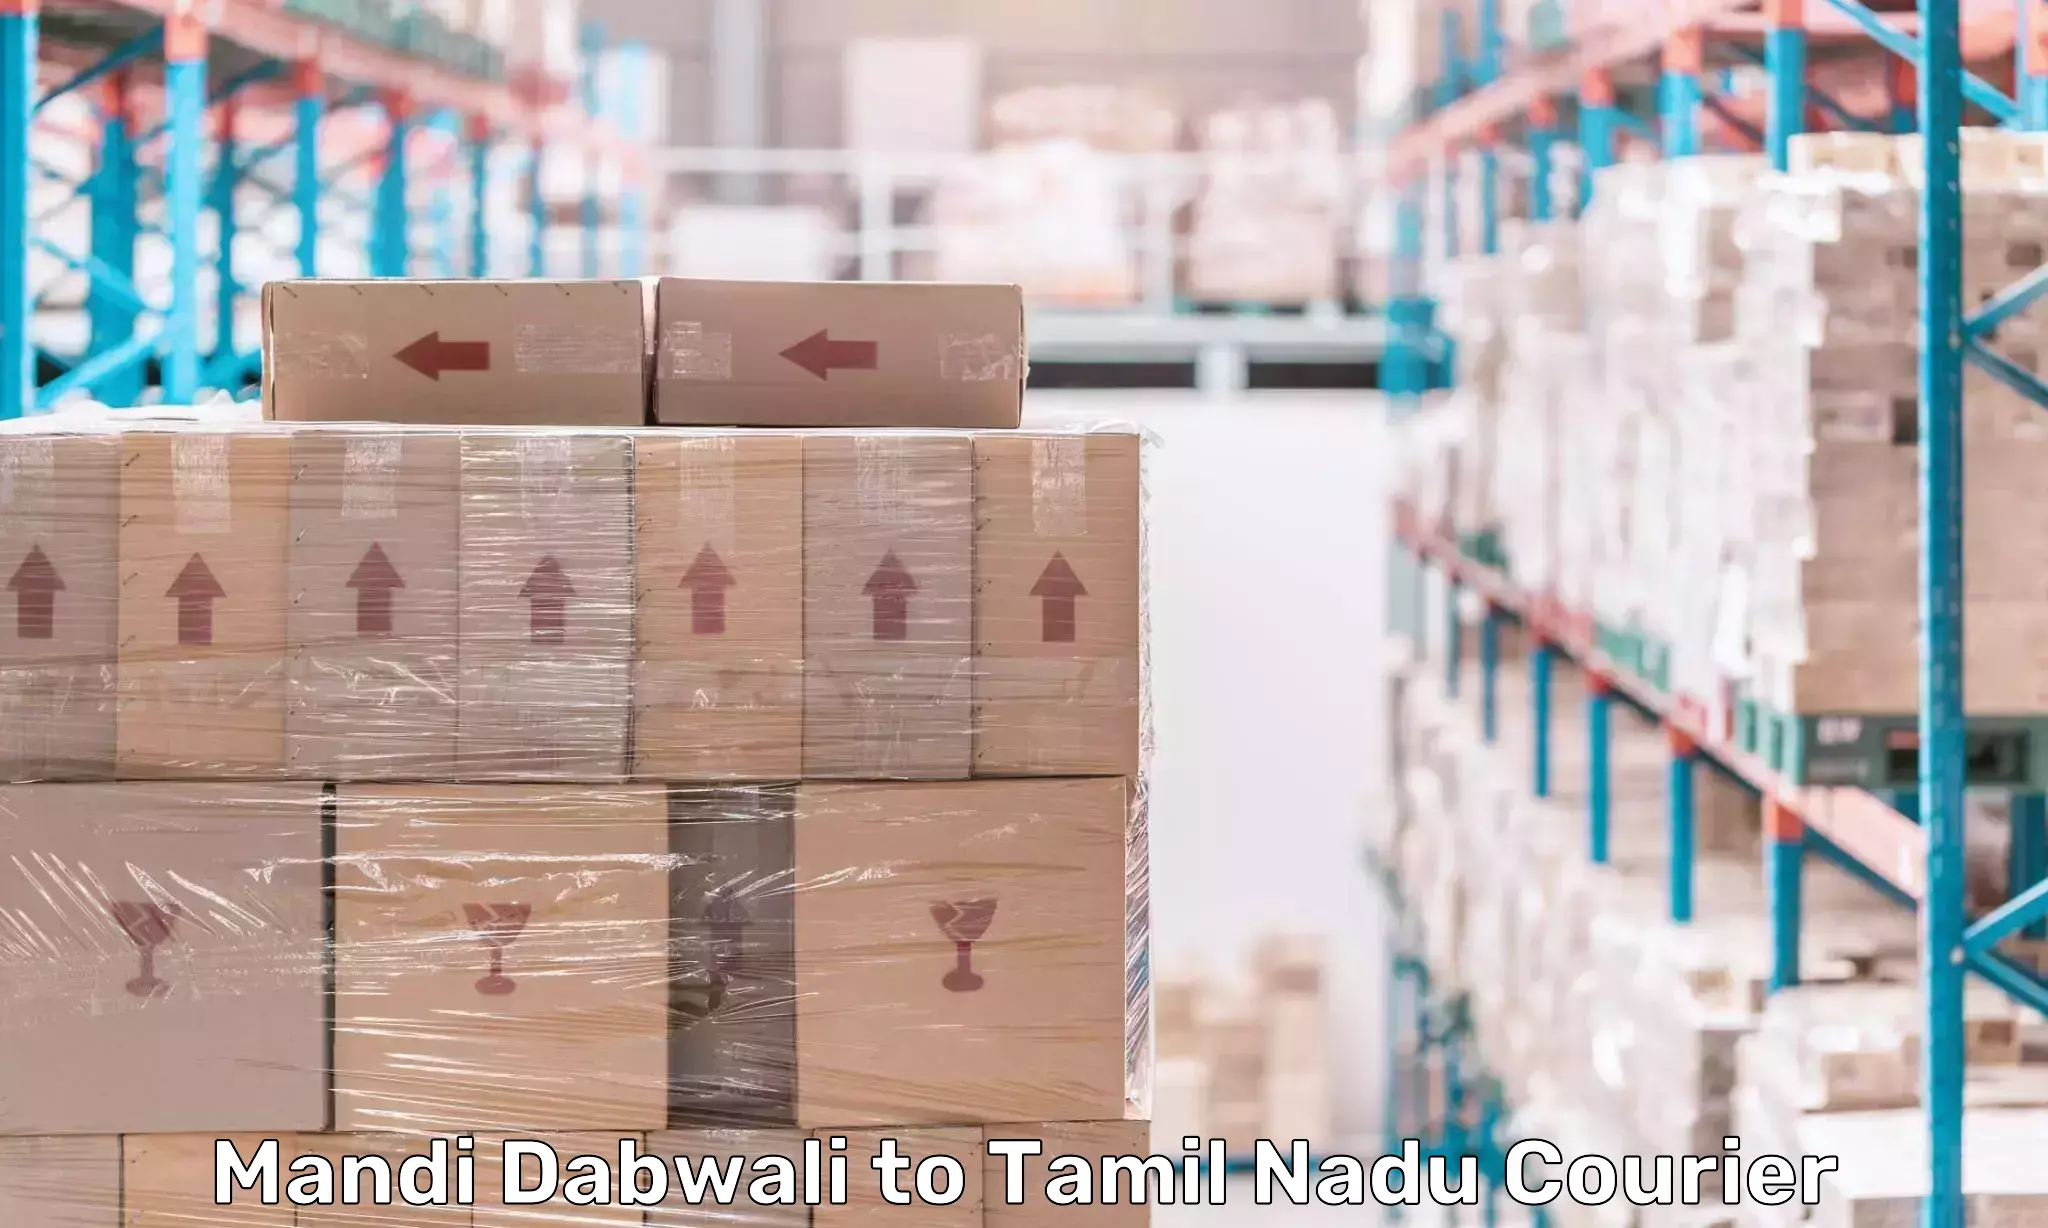 End-to-end delivery Mandi Dabwali to Tamil Nadu